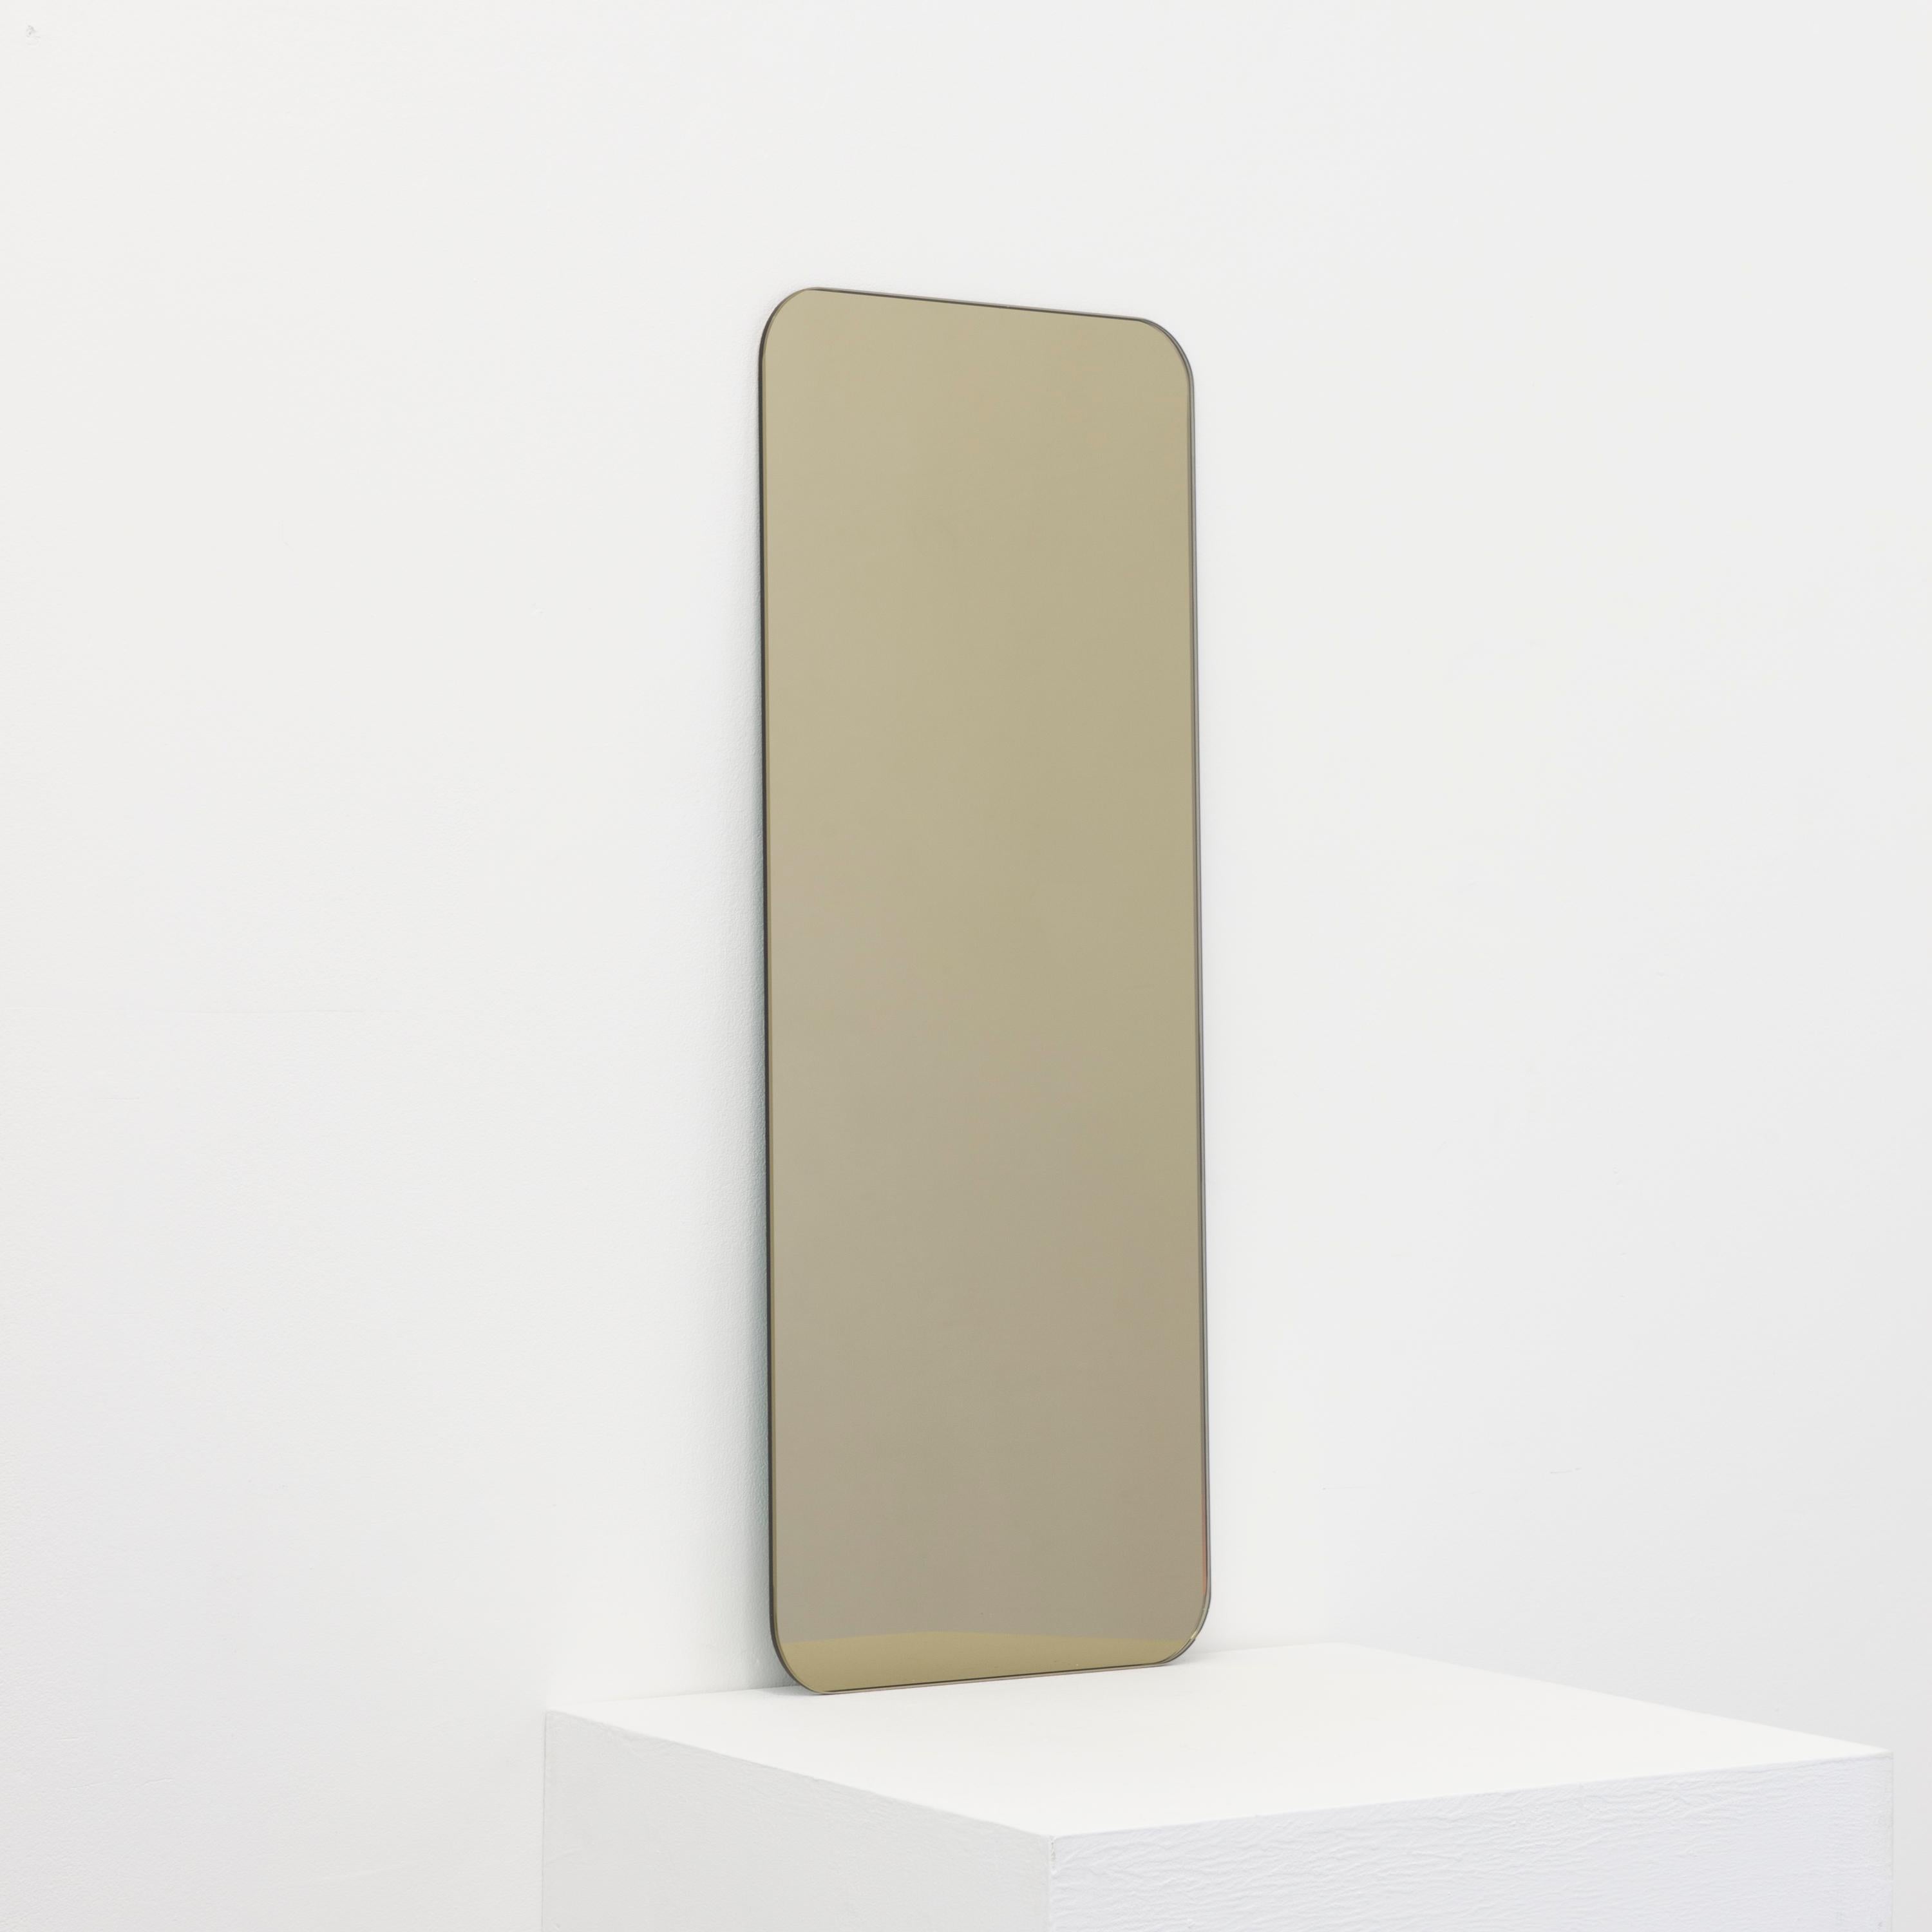 This item is available from stock.

Minimalist Quadris™ bronze tinted rectangular frameless mirror with floating effect. Quality design that ensures the mirror sits perfectly parallel to the wall. Designed and made in London, UK.

Fitted with